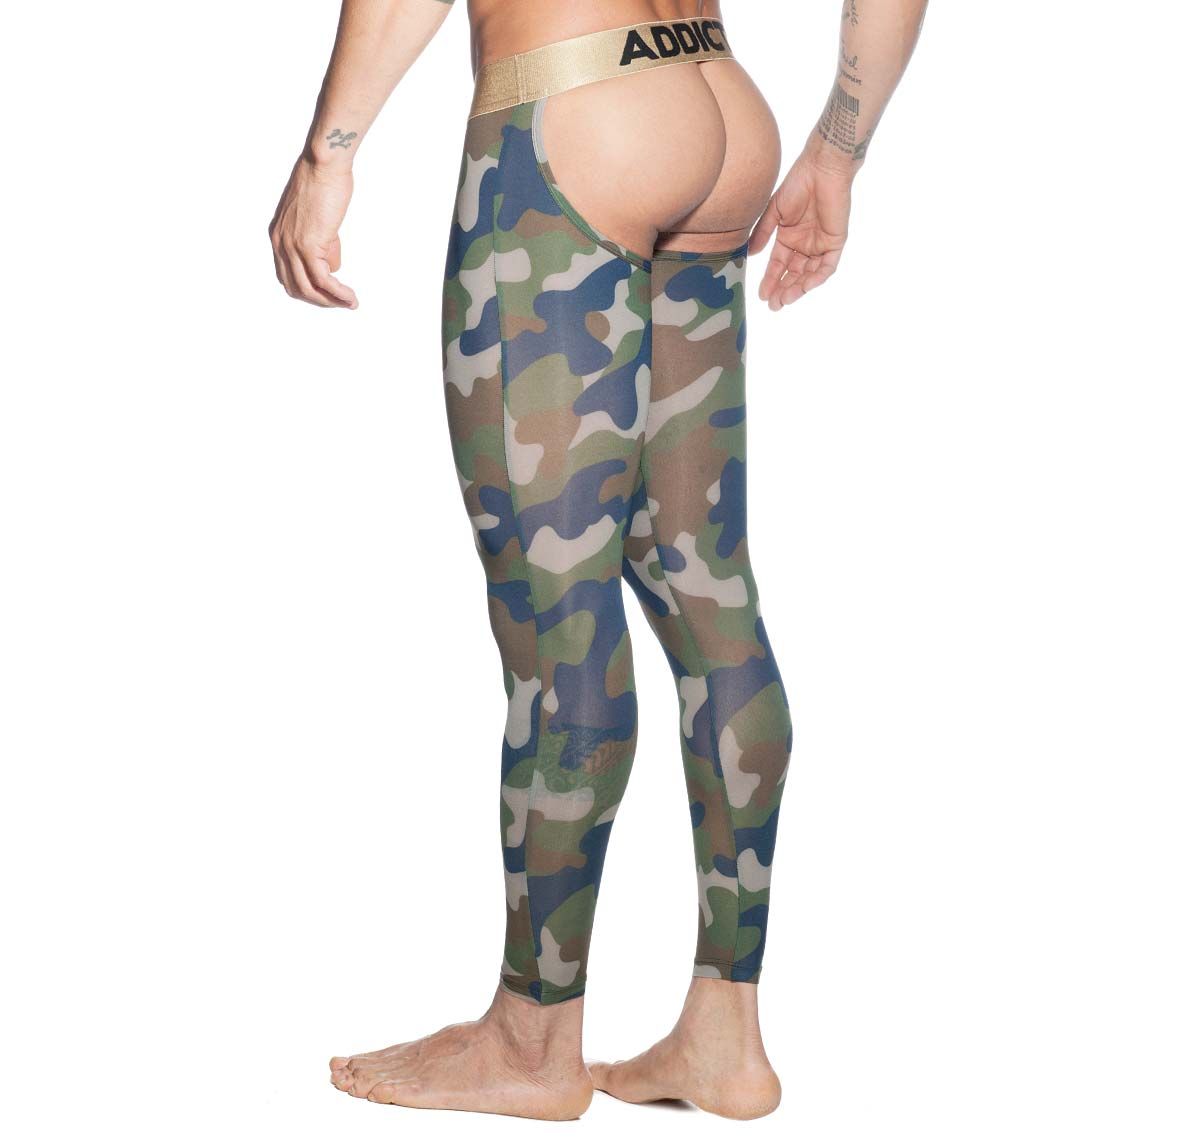 Addicted mutande lunghe BOTTOMLESS CAMO LONG JOHN AD695, camouflage